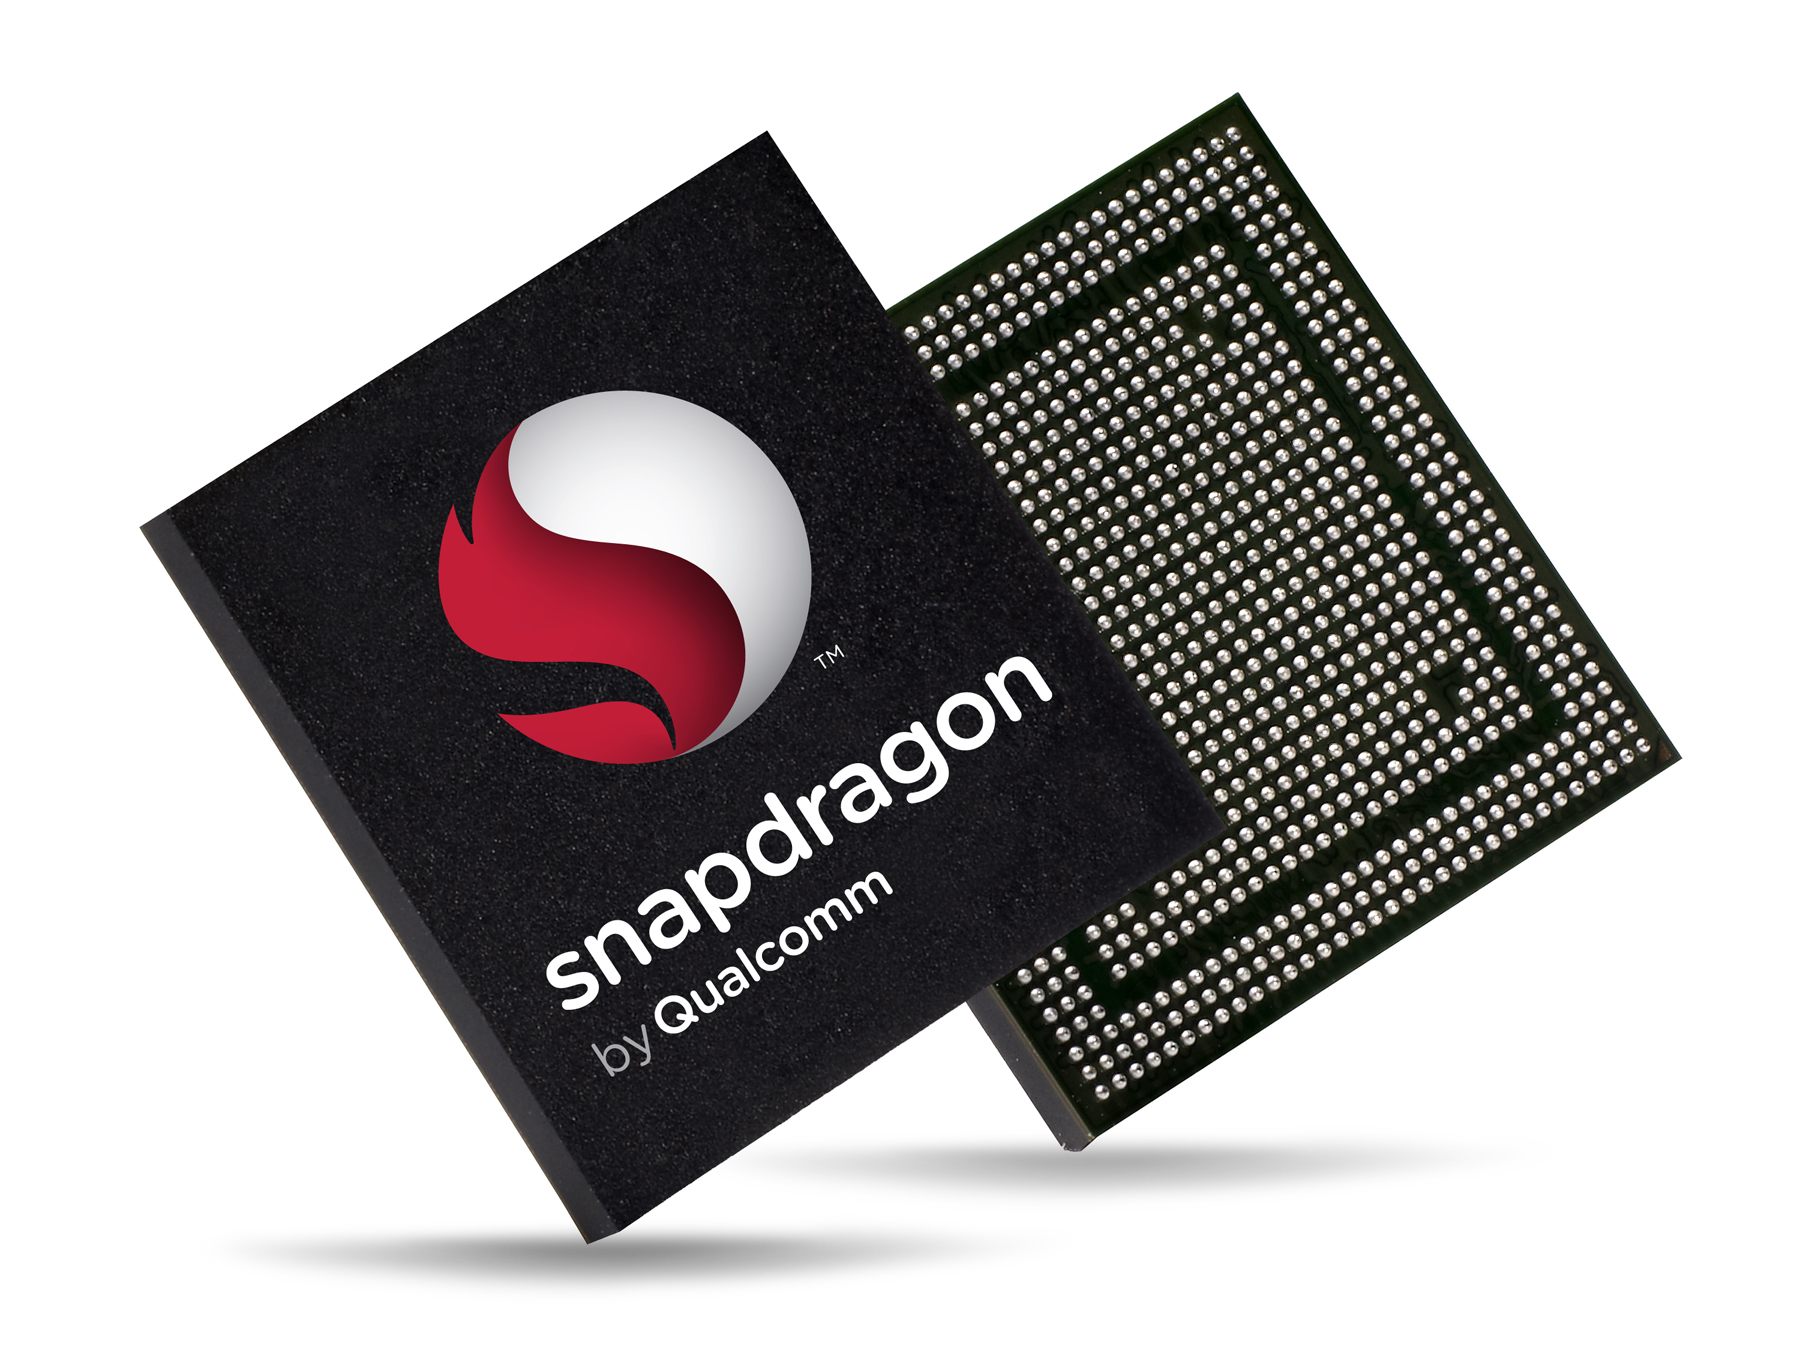 Snapdragon-Chip-with-logo